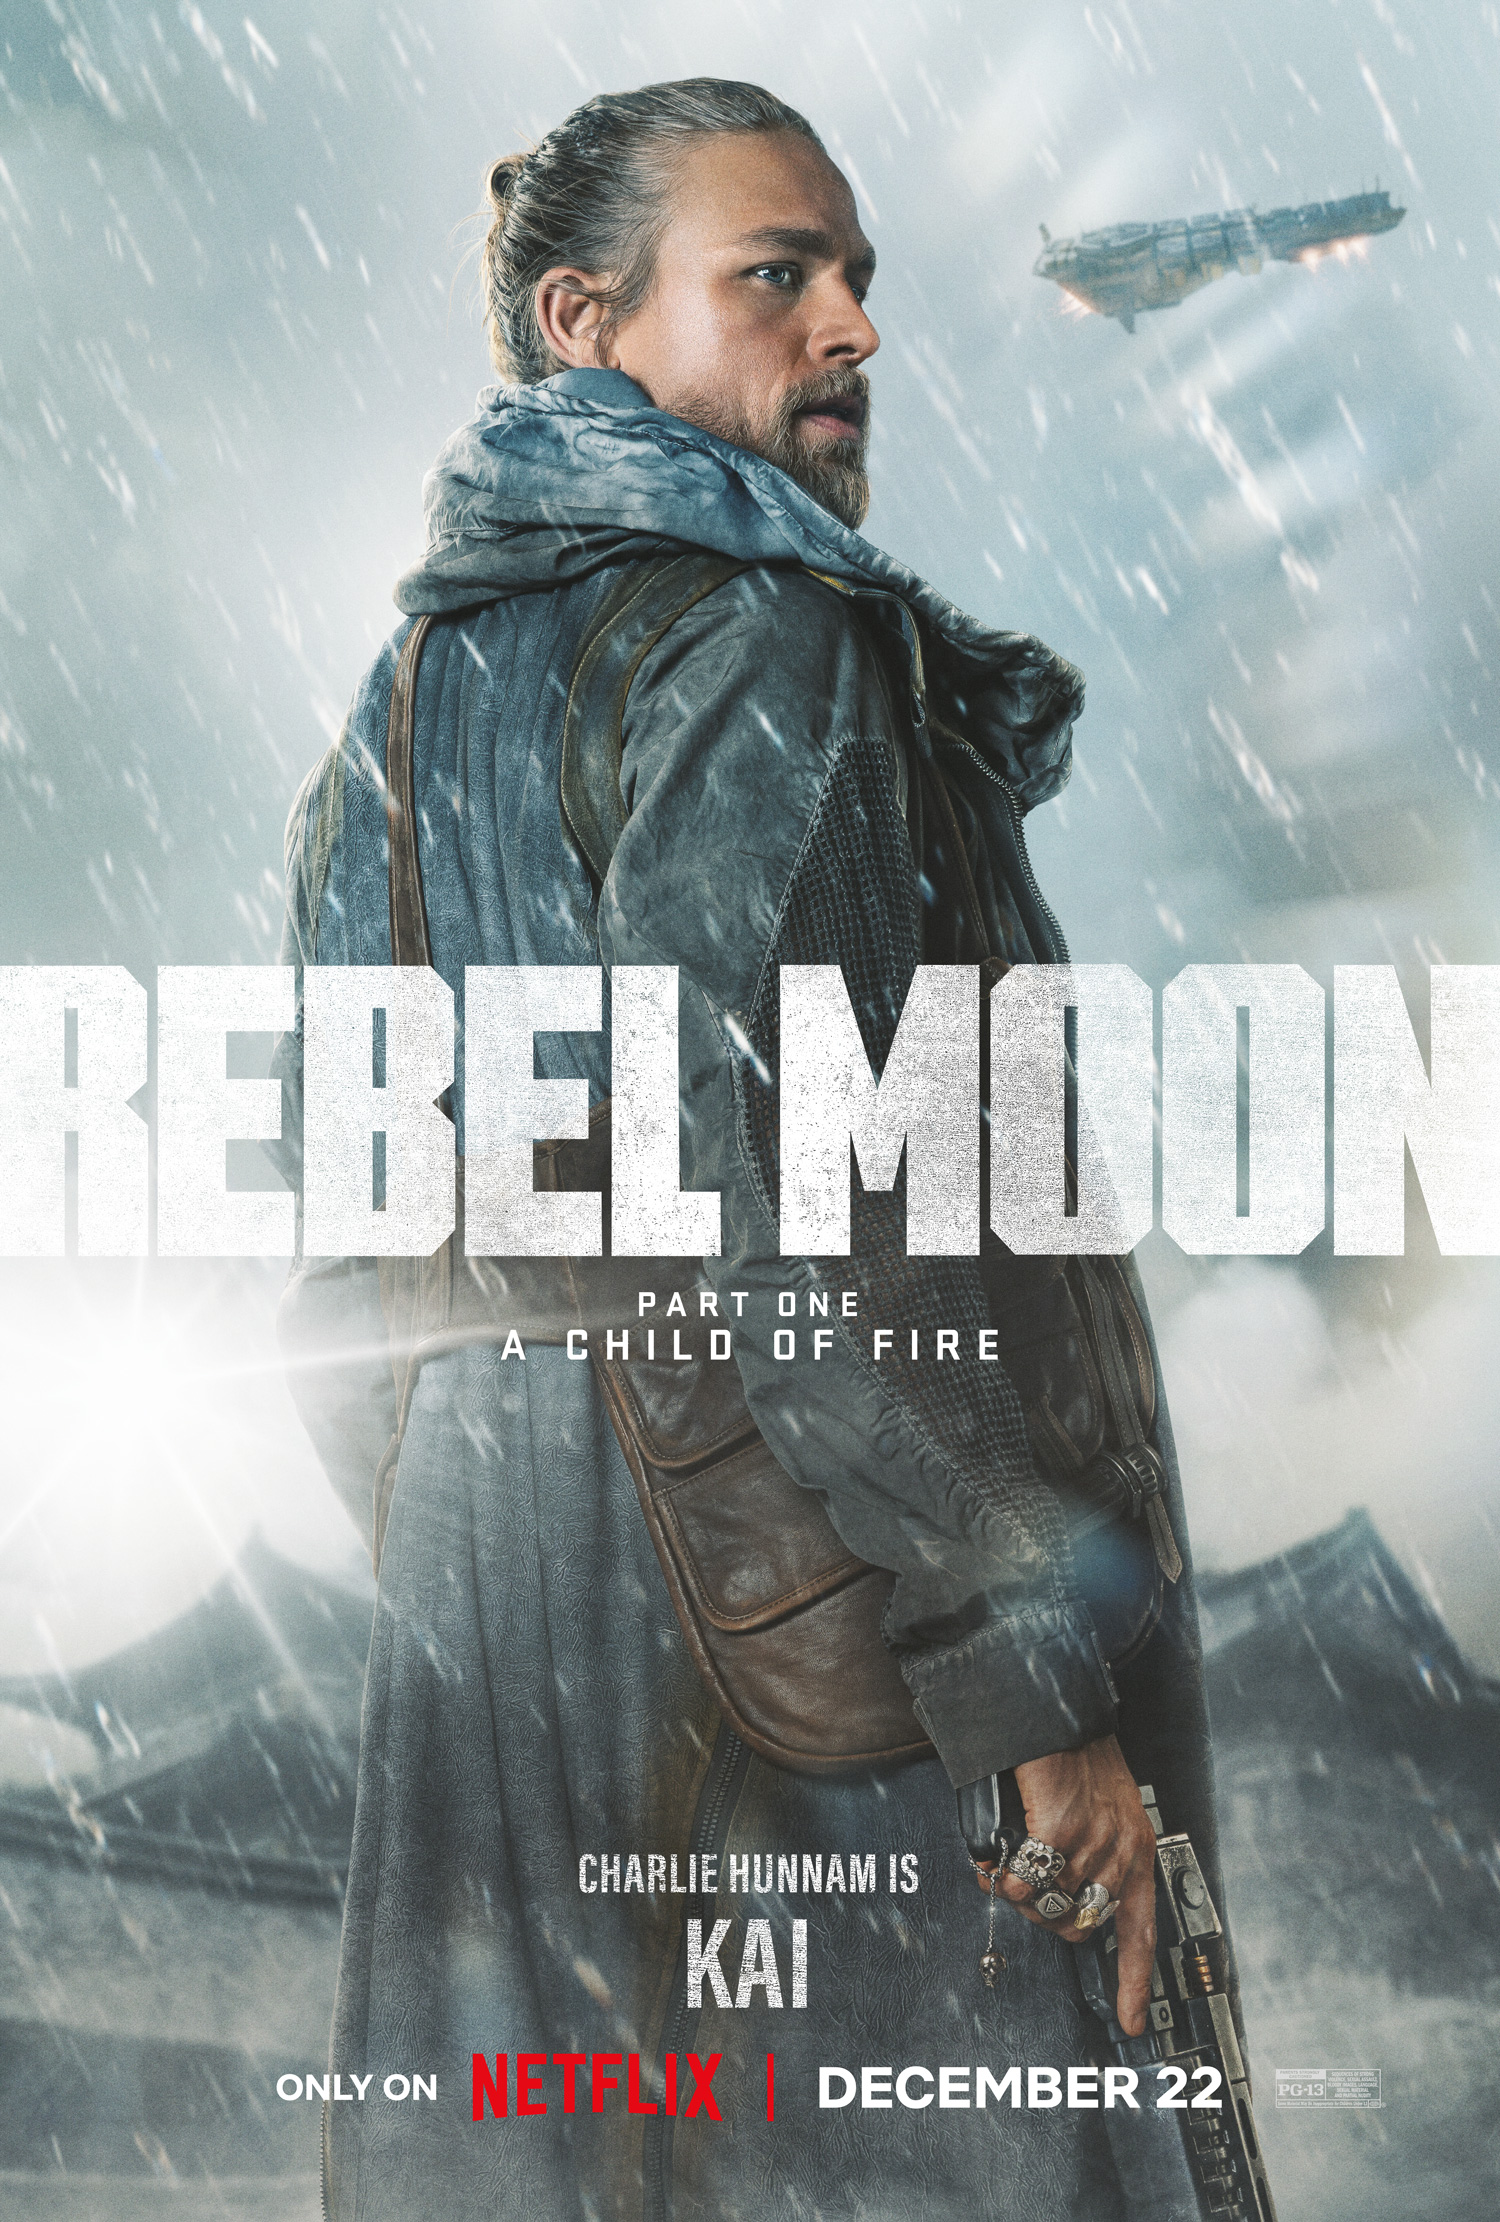 Rebel Moon Part One — prepare for A Child of Fire